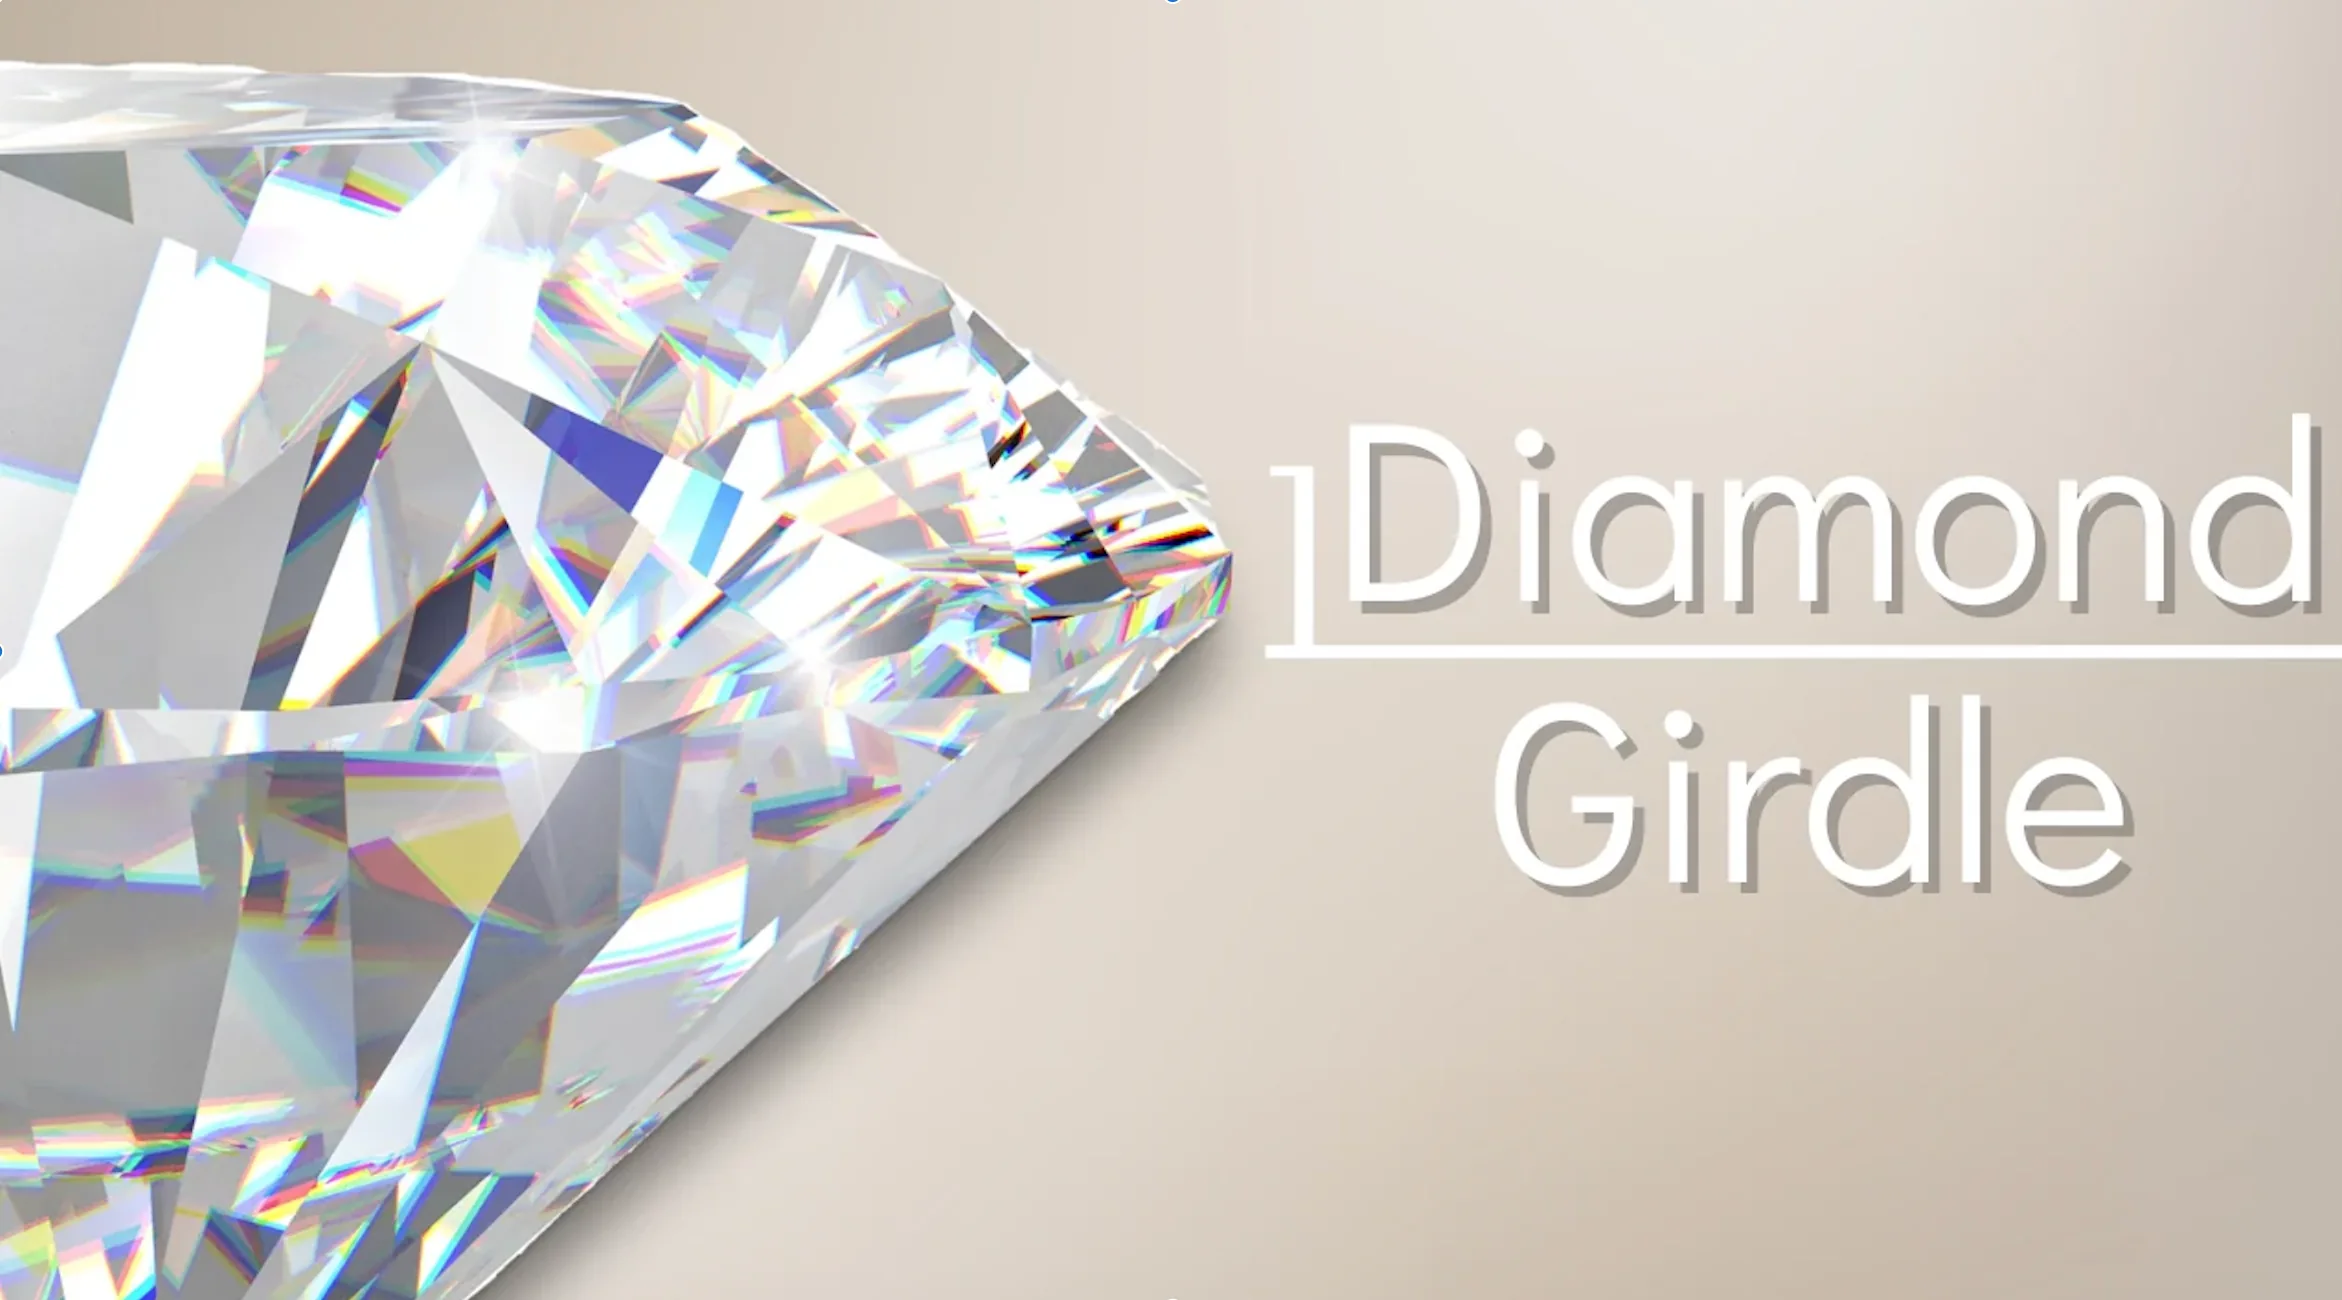 All About Diamond Girdle: Important Tips